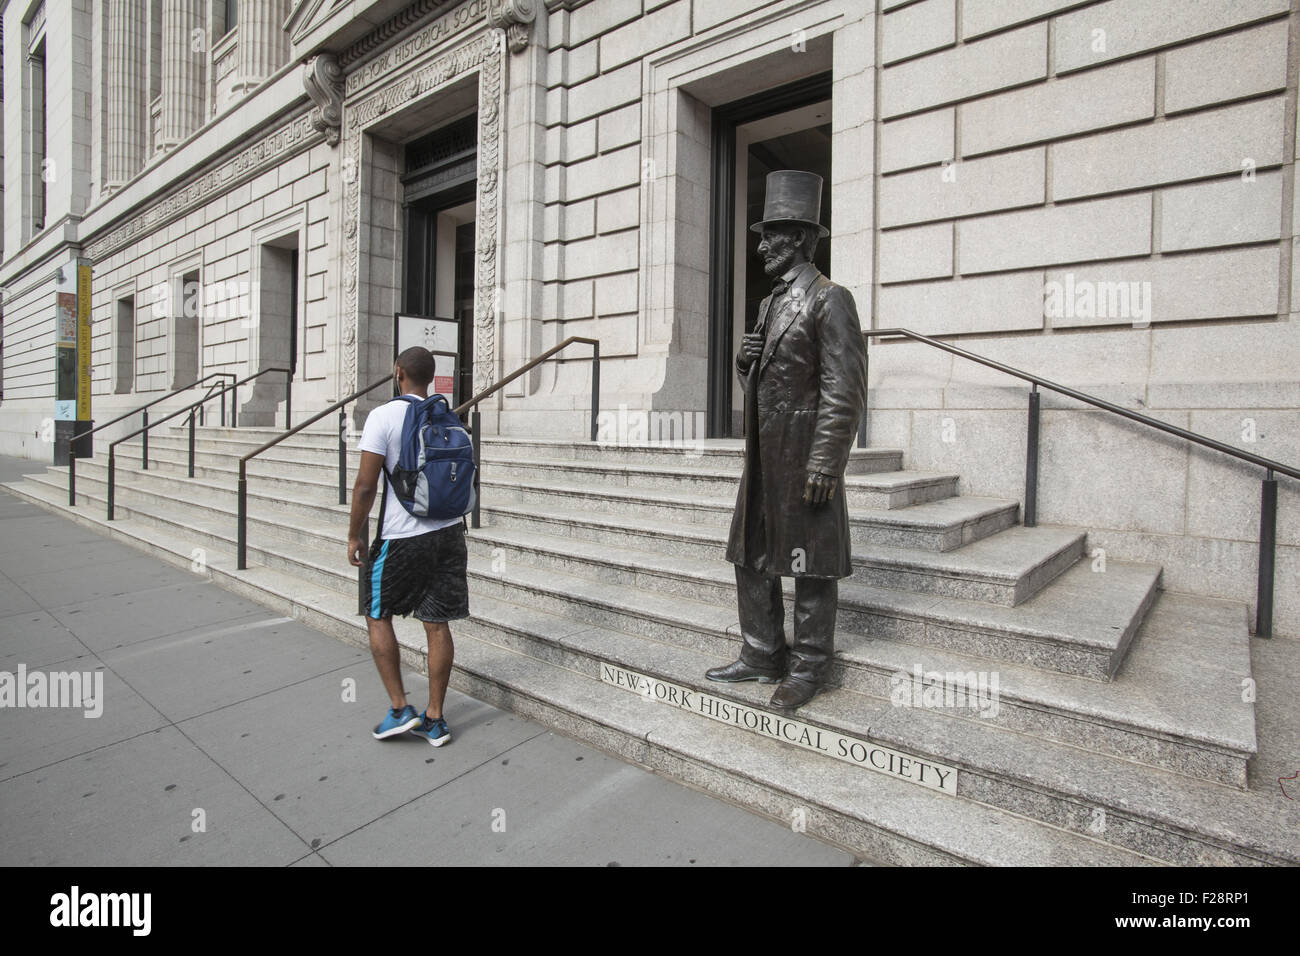 Sculpture of Abraham Lincoln on the steps of the NY Historical Society as a young African American man walks by. Stock Photo